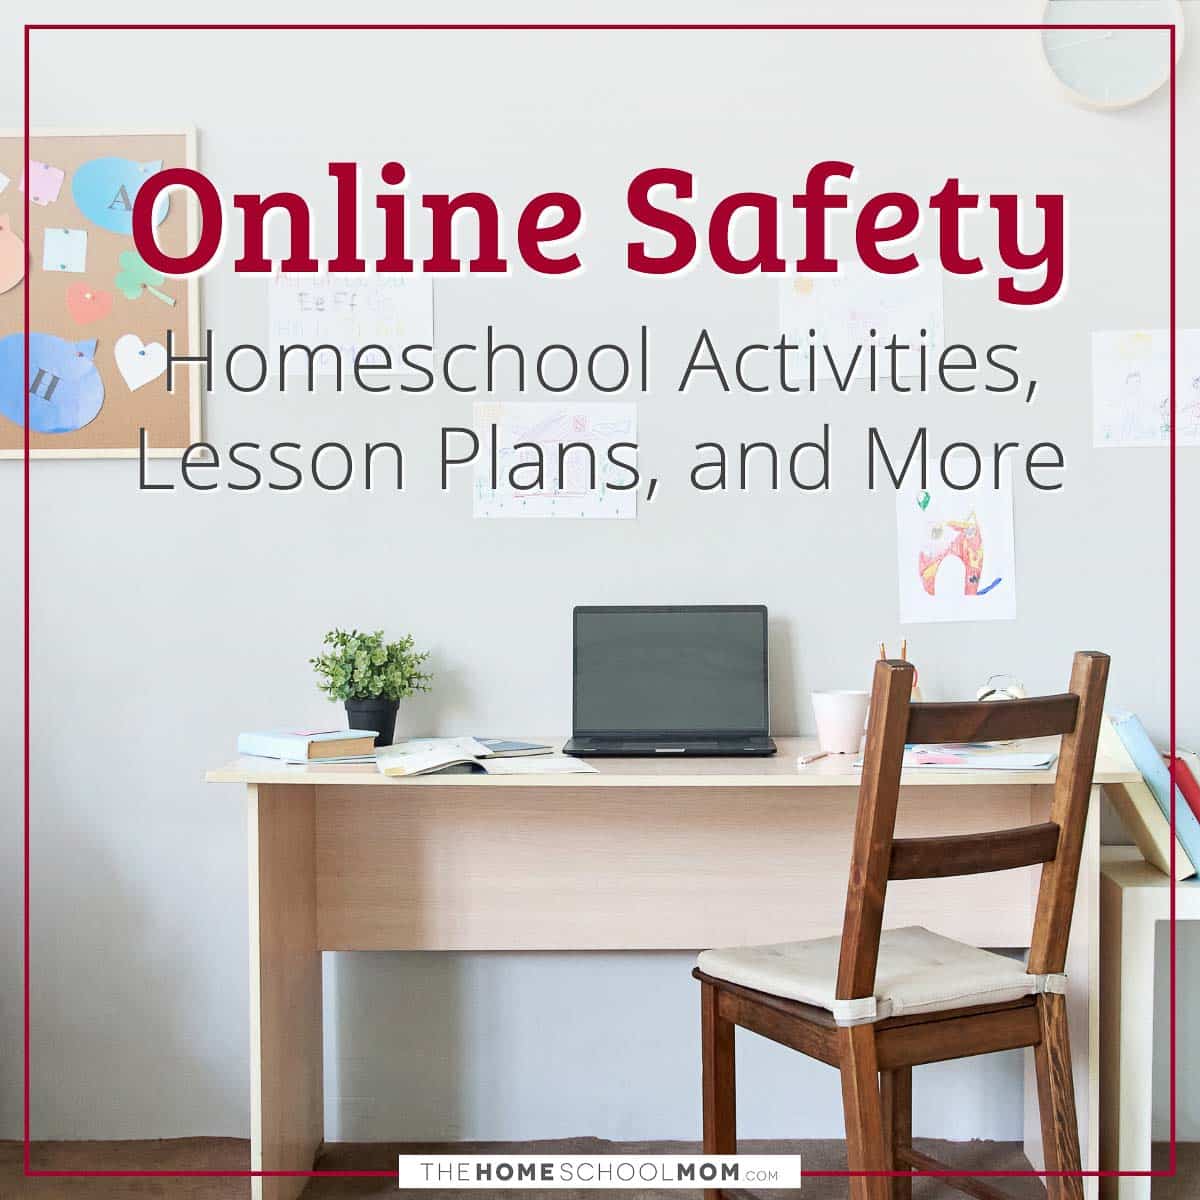 Online Safety Homeschool Activities, Lesson Plans, and More.